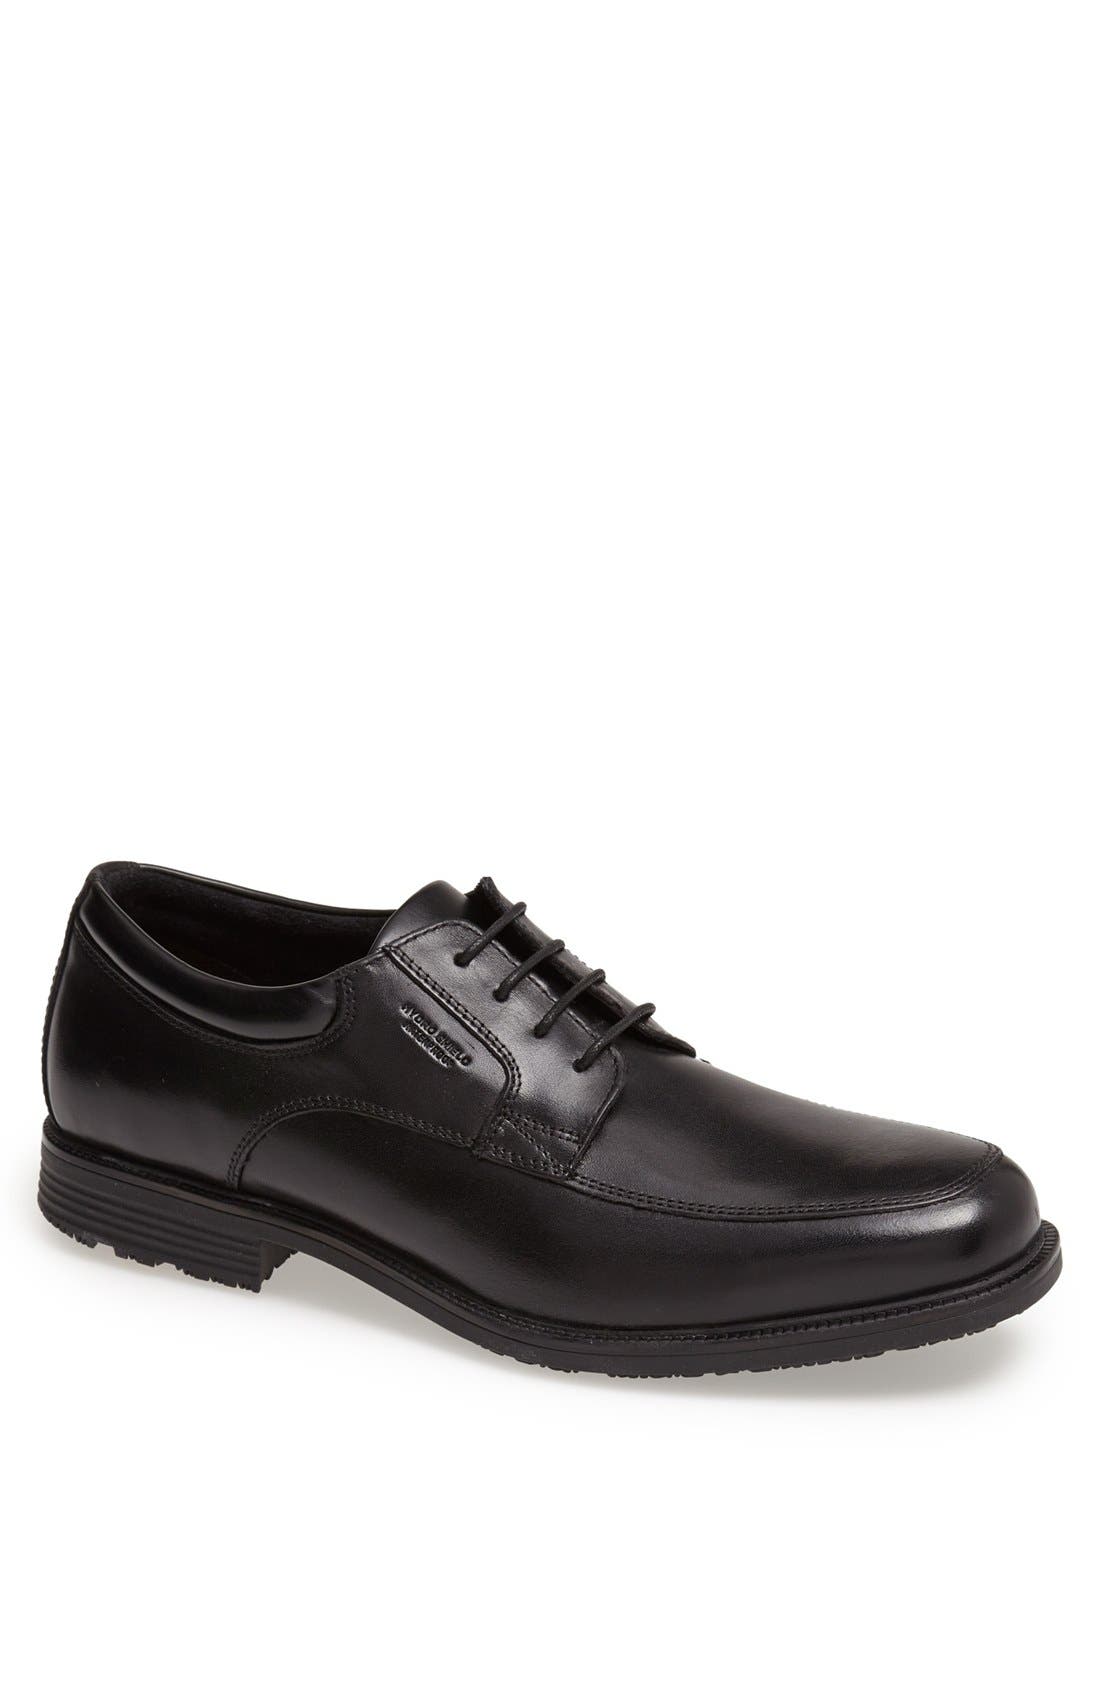 mens rockport casual dress shoes